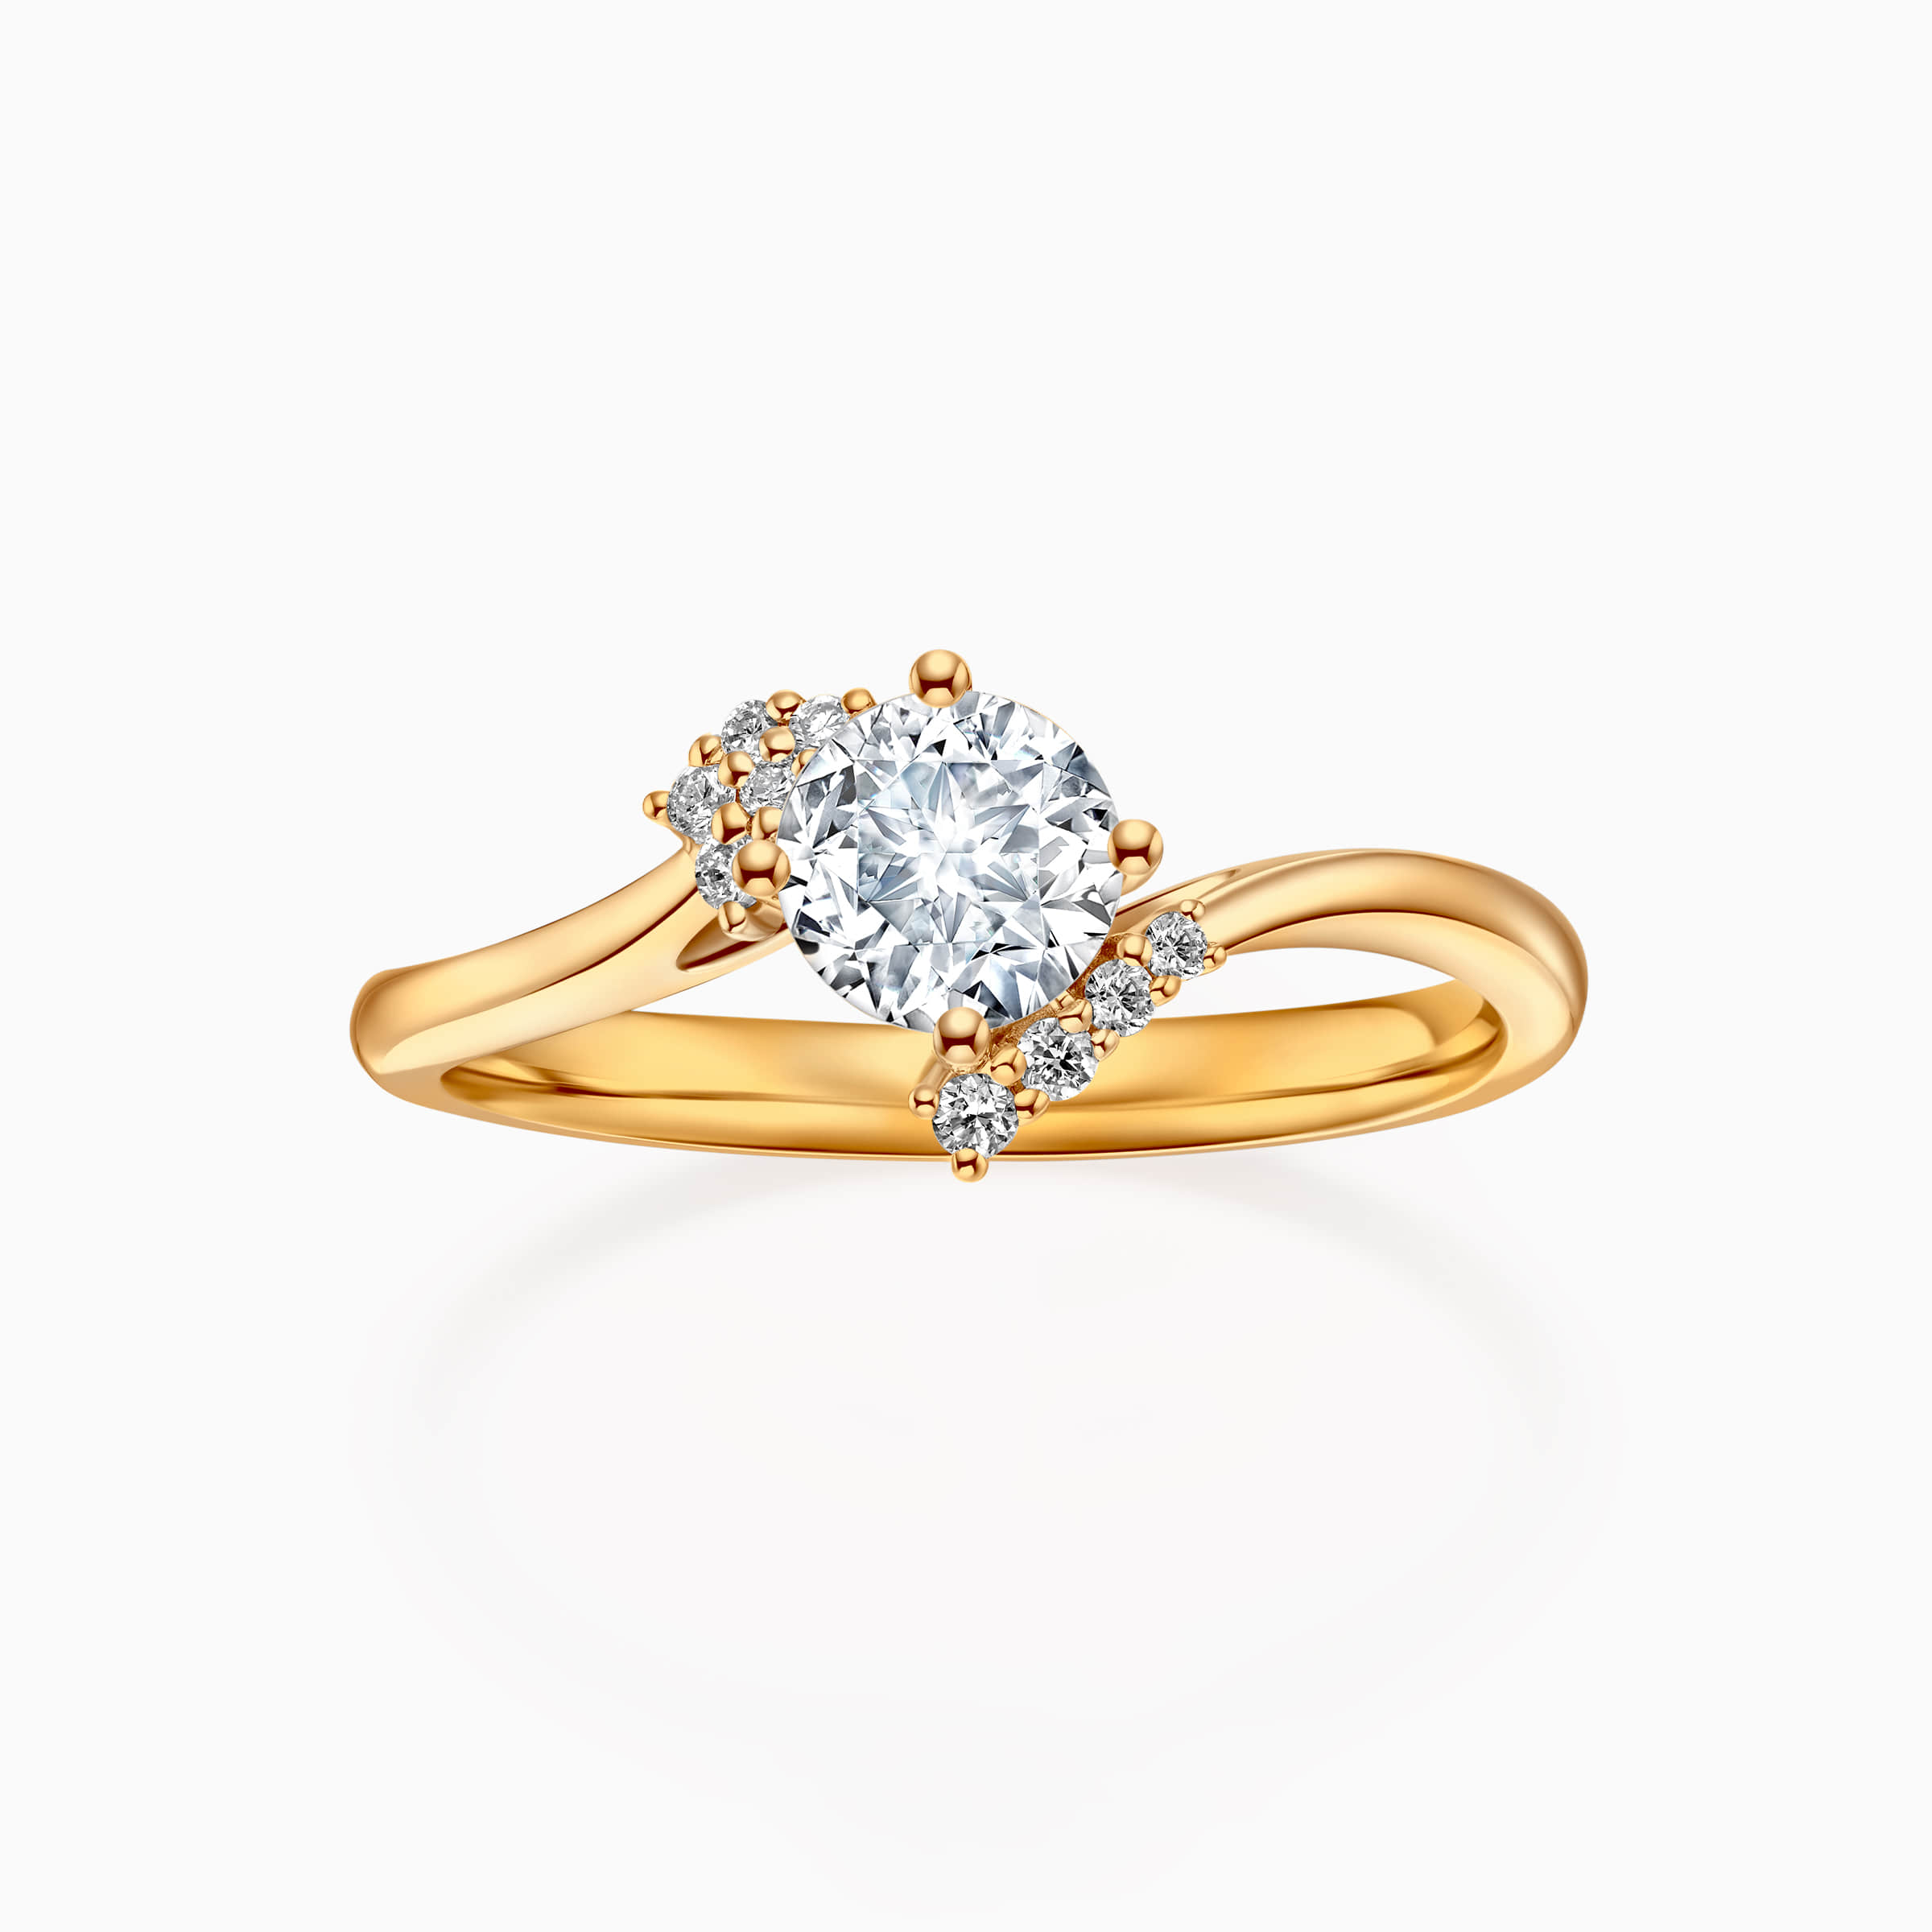 Darry Ring diamond bypass engagement ring yellow gold